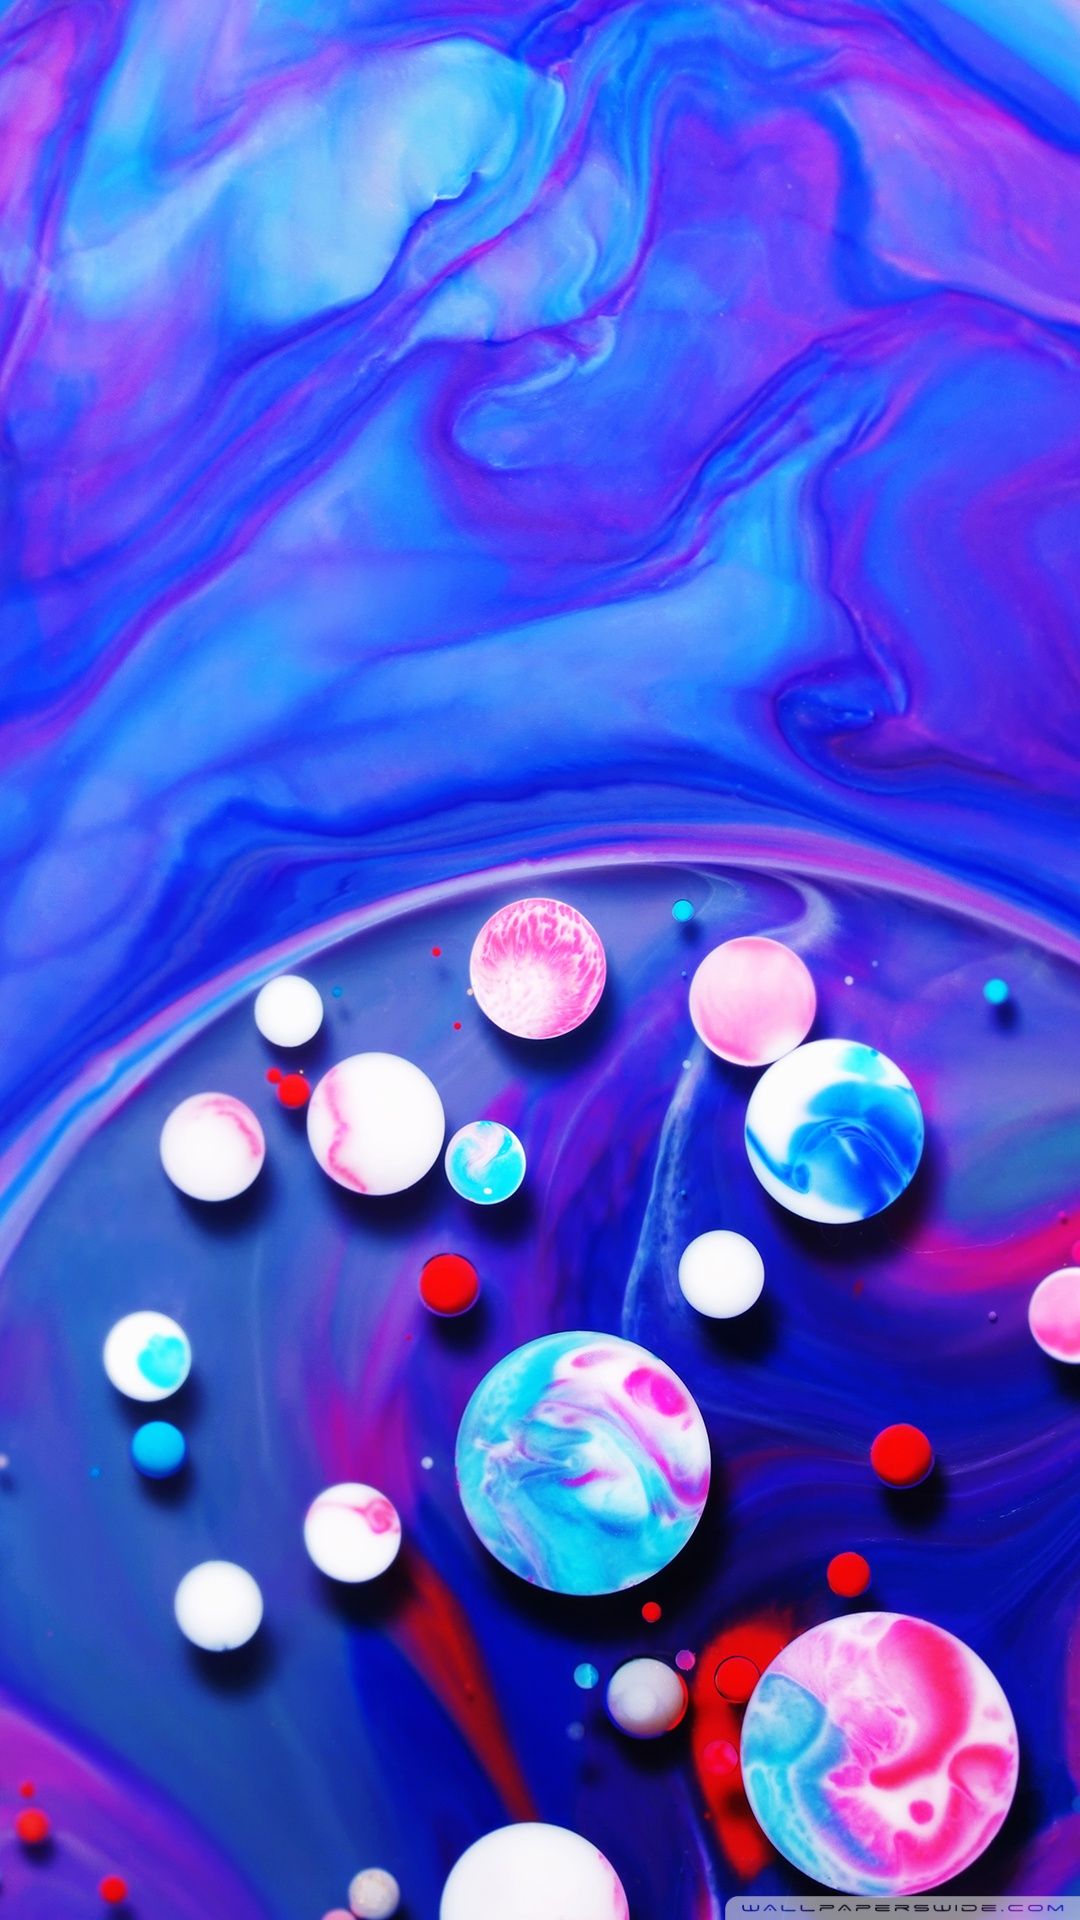 IPhone wallpaper with abstract colorful background - Bubbles